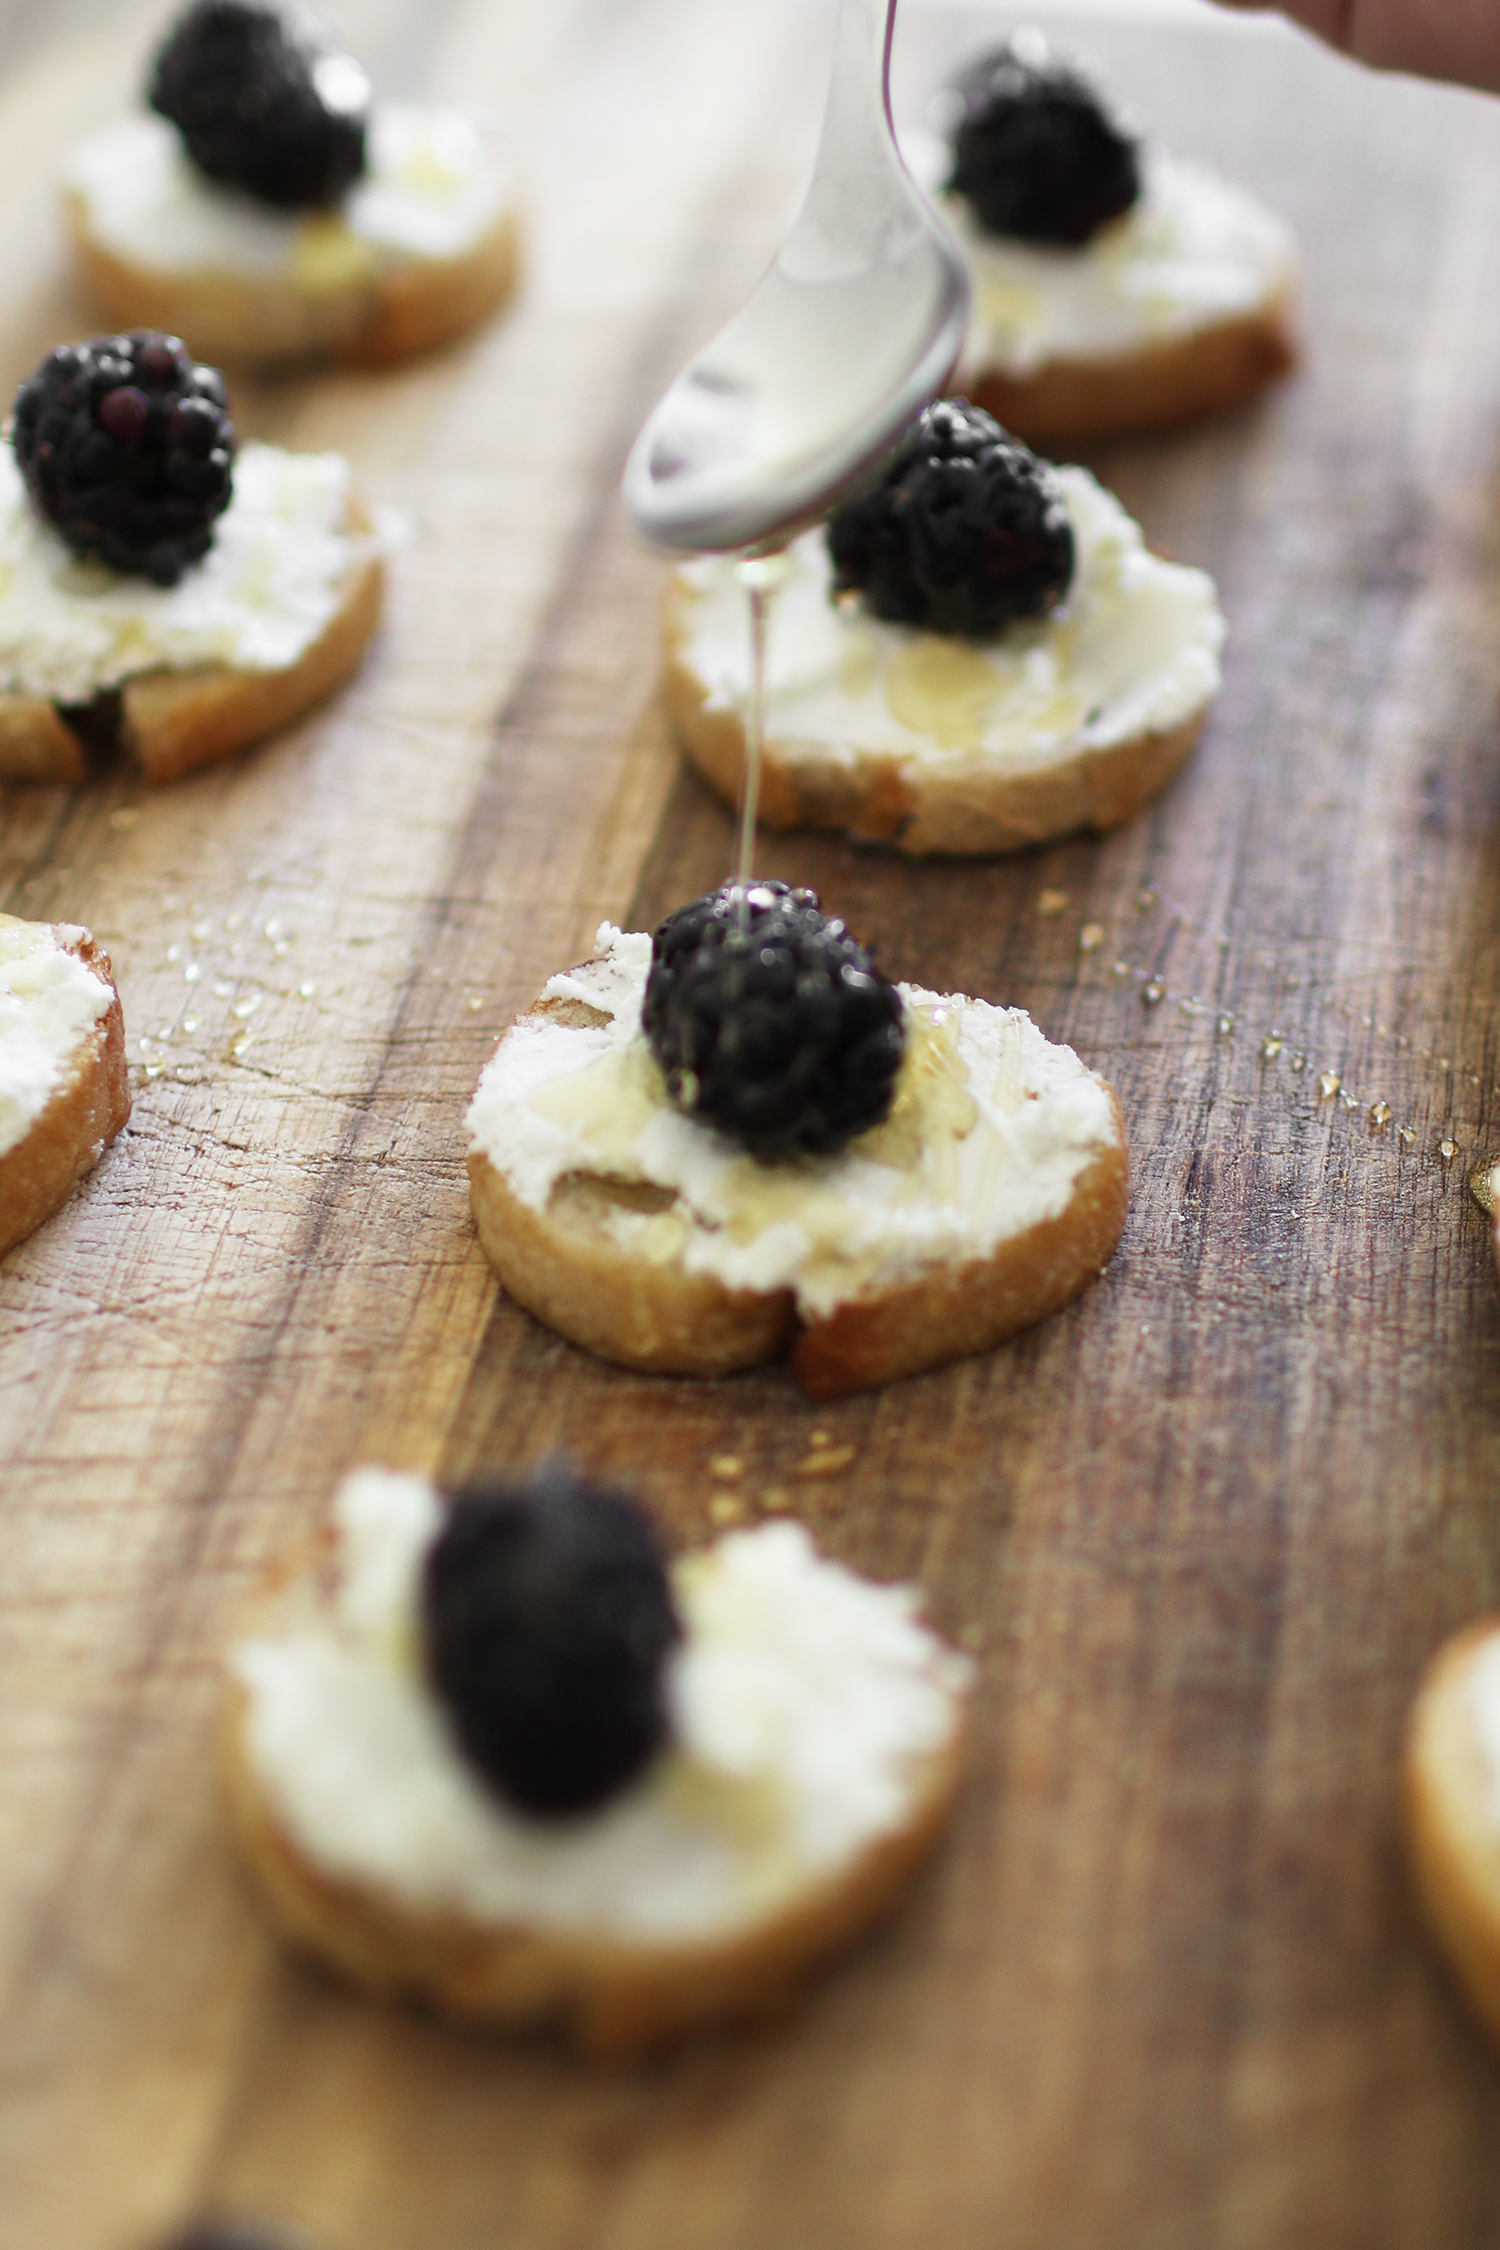 A blackberry and goat cheese crostini appetizer recipe. An easy and beautiful way to wow at your next gathering. Bookmark the recipe over at KaraLayne.com